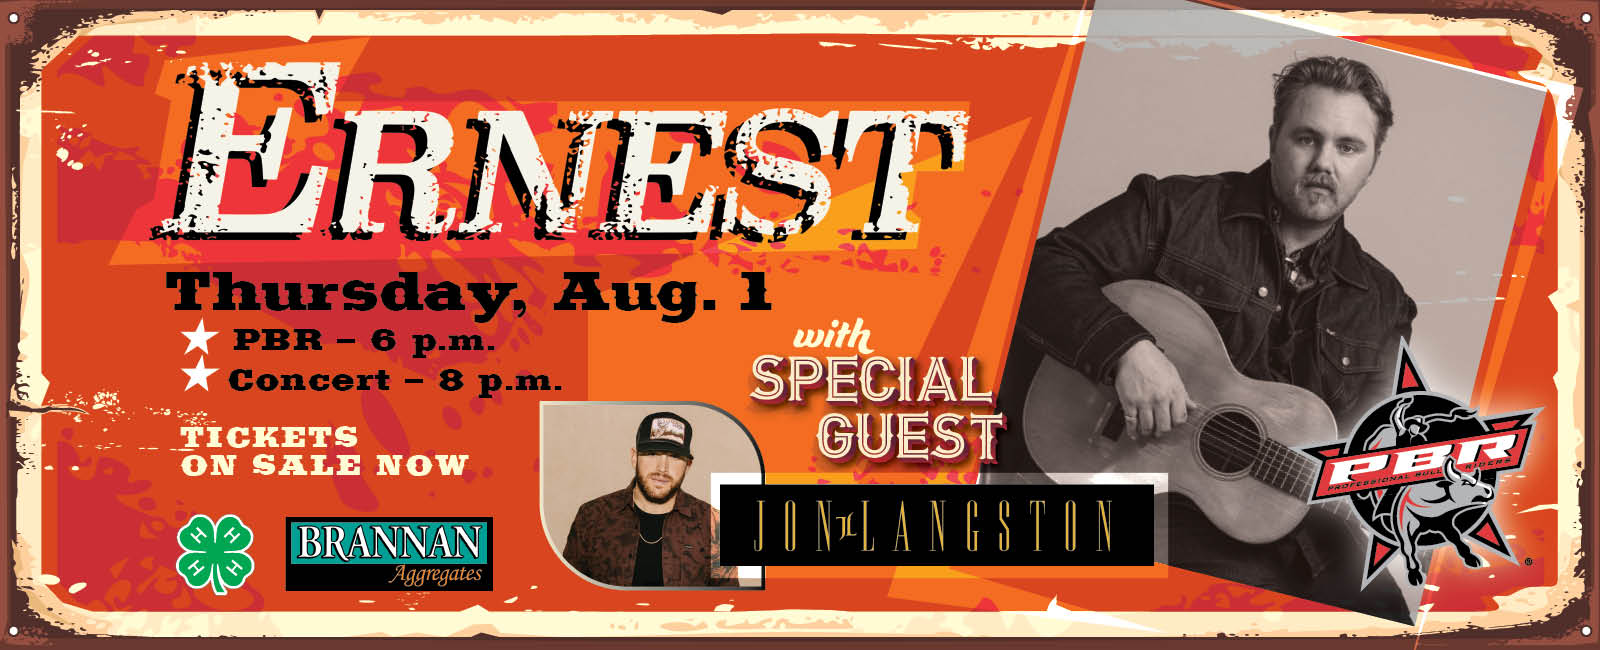 Ernest with special guest Jon Langston - Thursday, Aug. 1